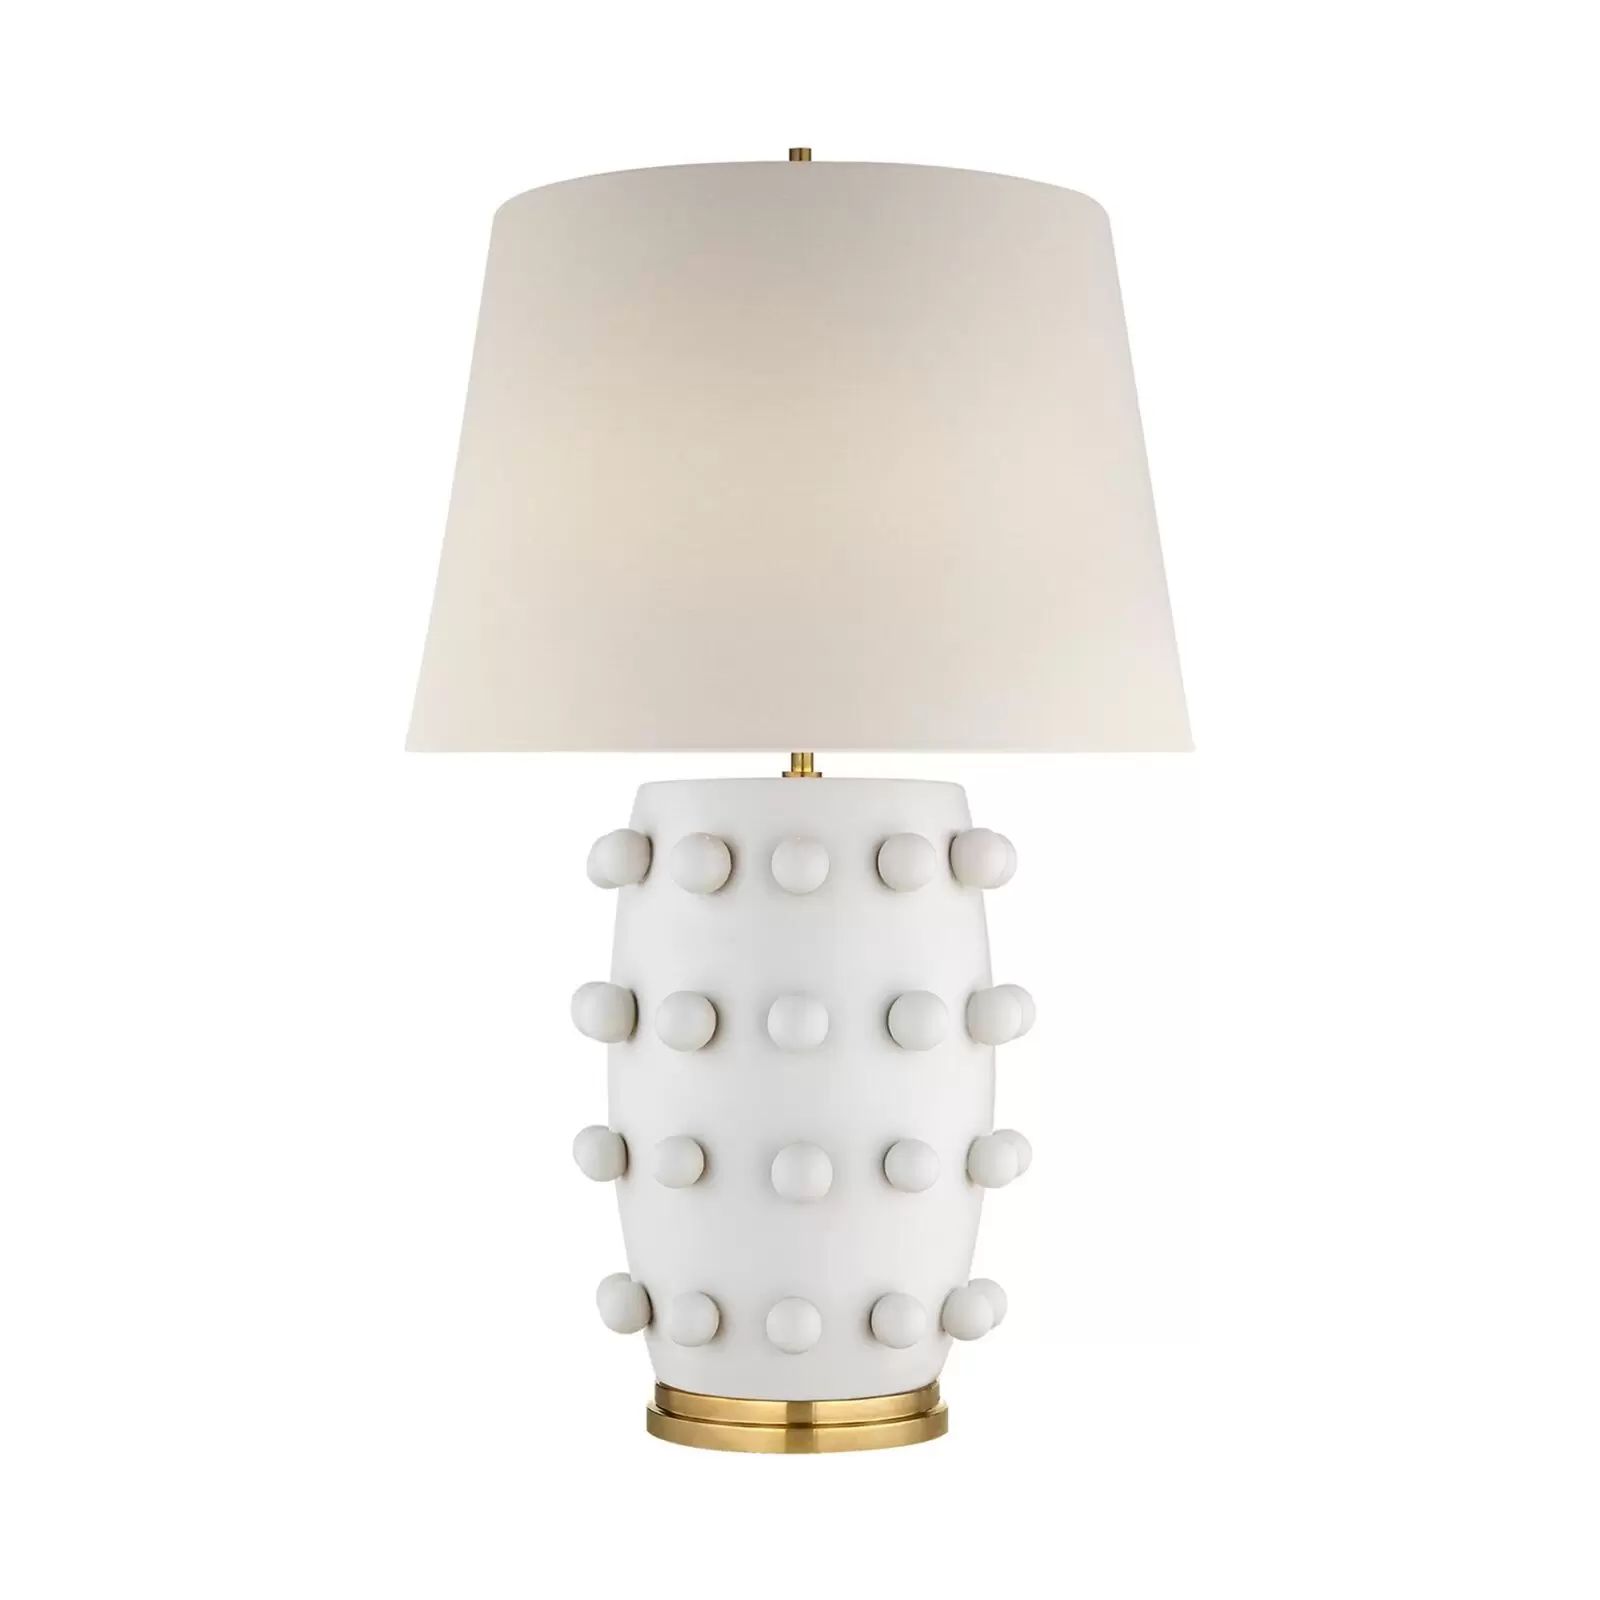 New


Kelly Wearstler Linden 26 Inch Table Lamp by Visual Comfort and Co.

Capitol ID: 2272166
MF... | 1800 Lighting